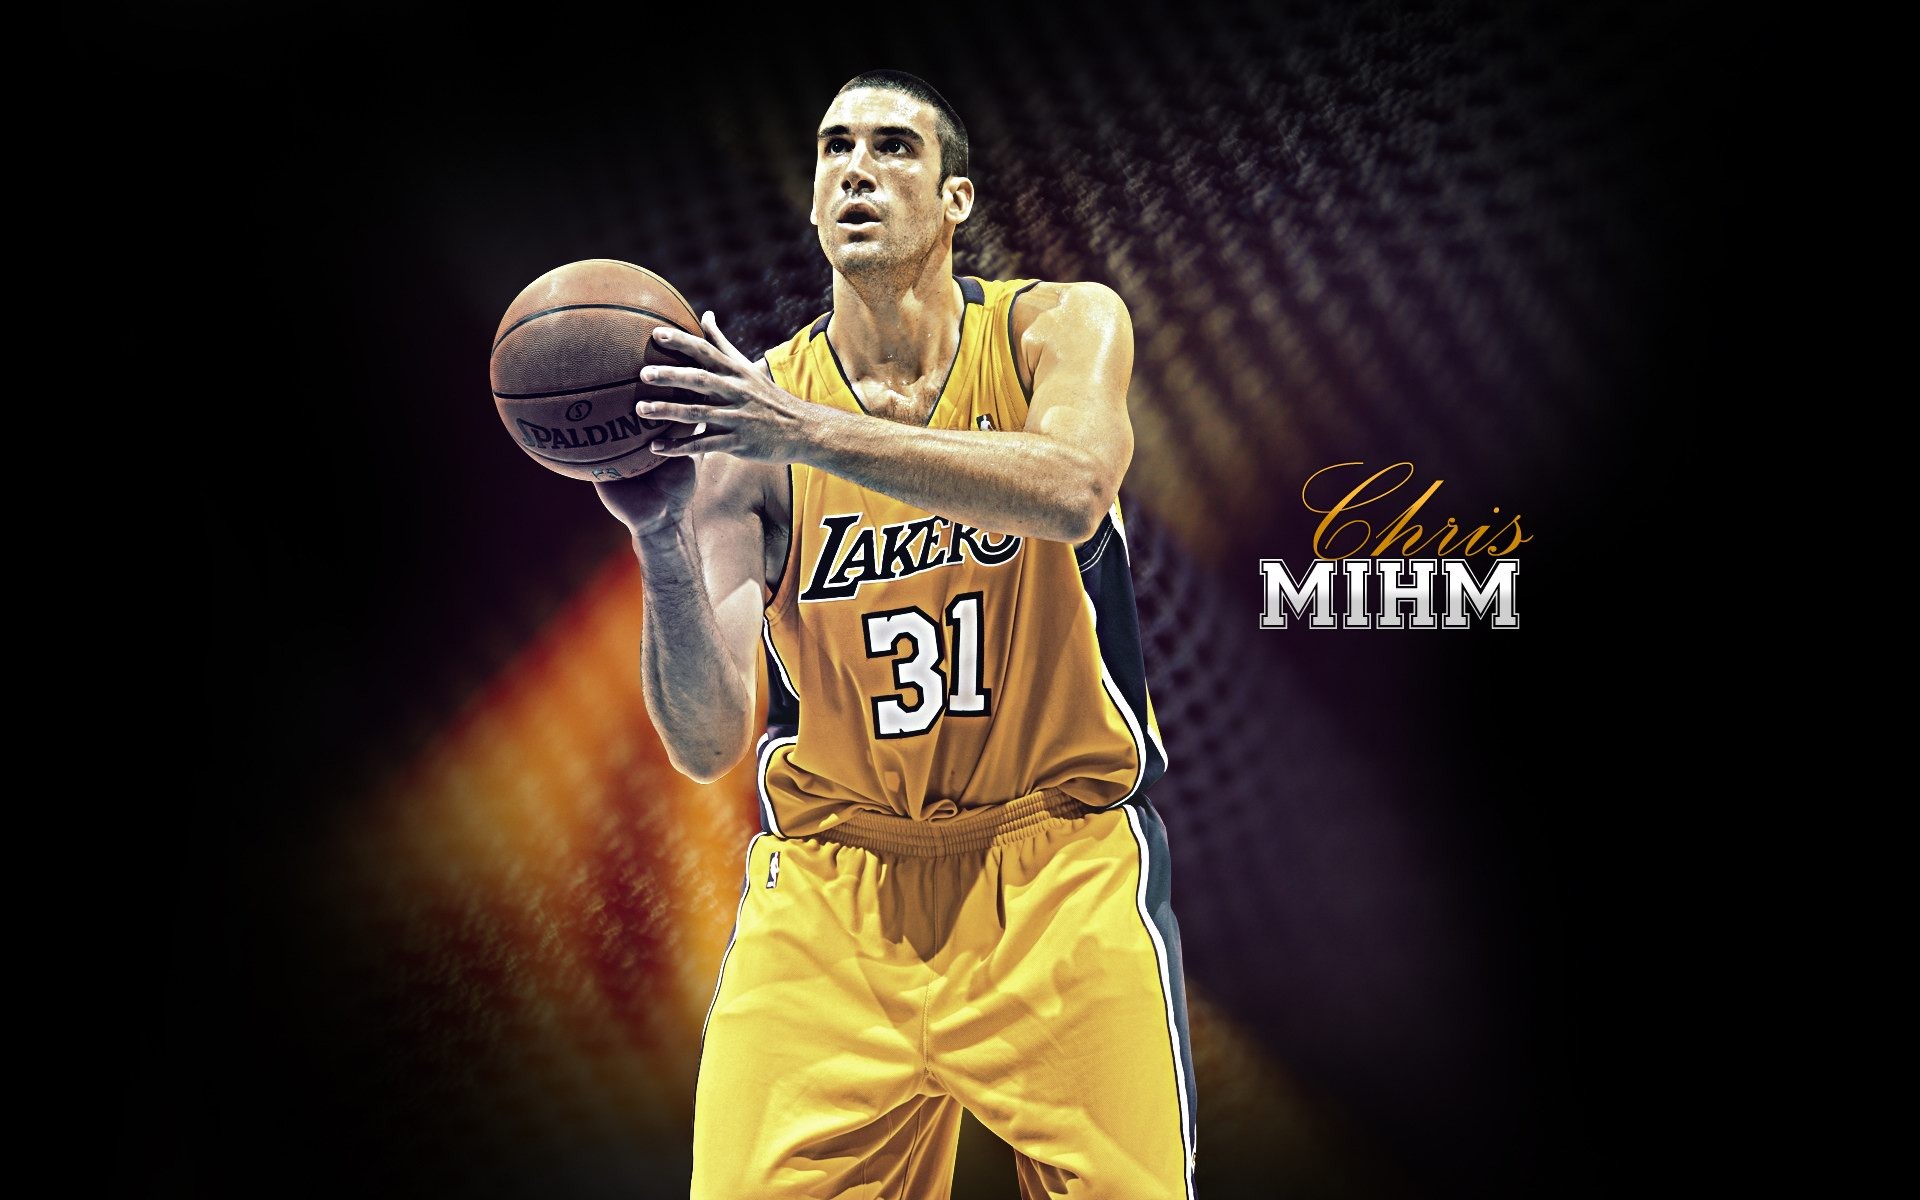 Los Angeles Lakers Official Wallpaper #4 - 1920x1200